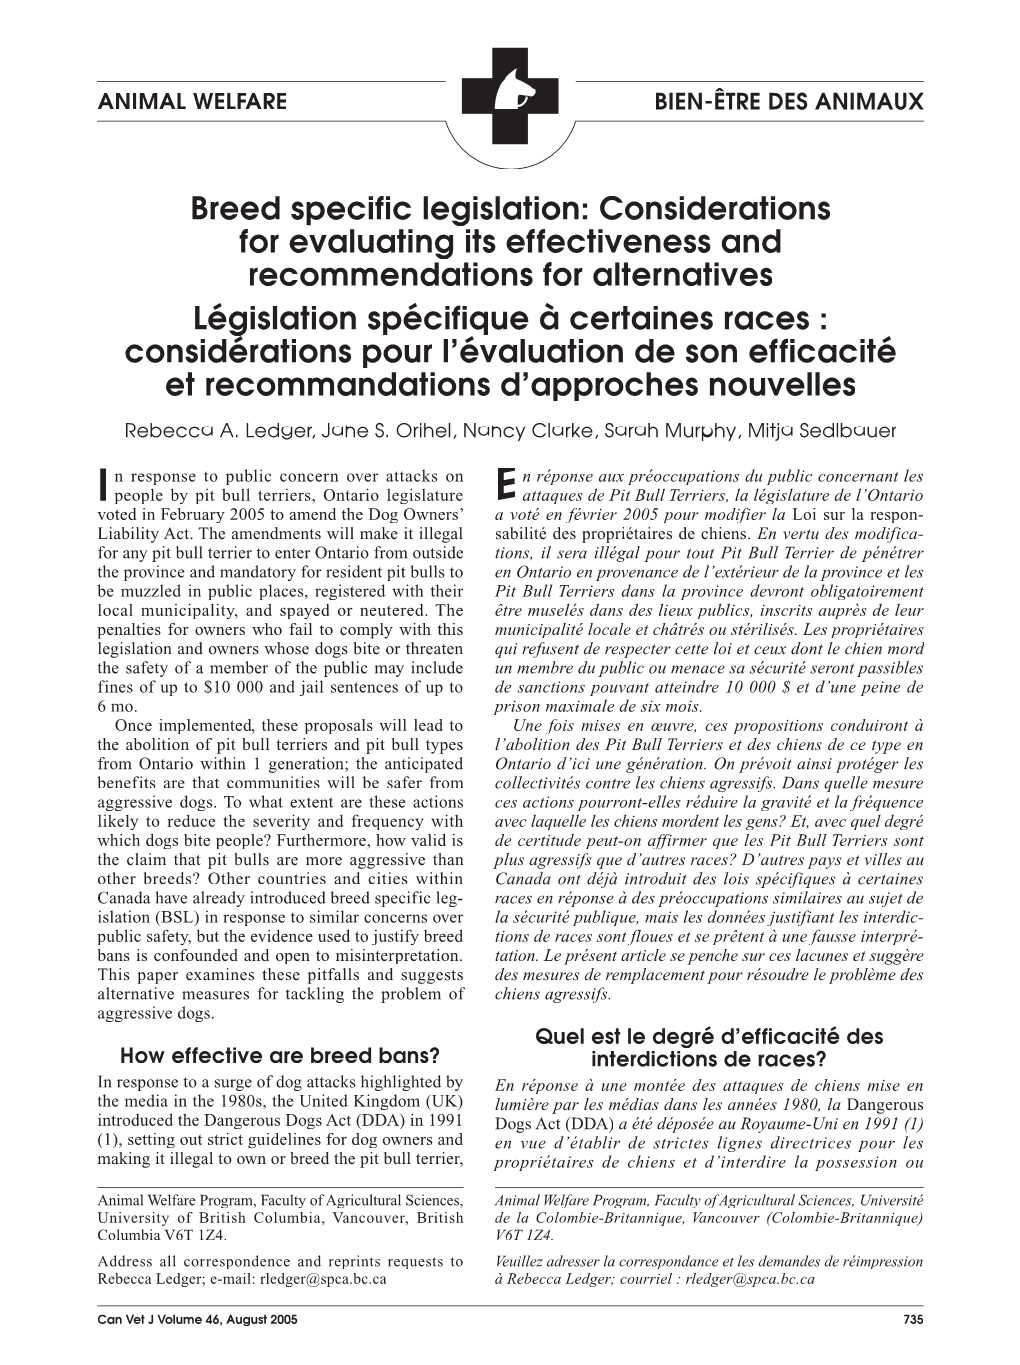 Breed Specific Legislation: Considerations for Evaluating Its